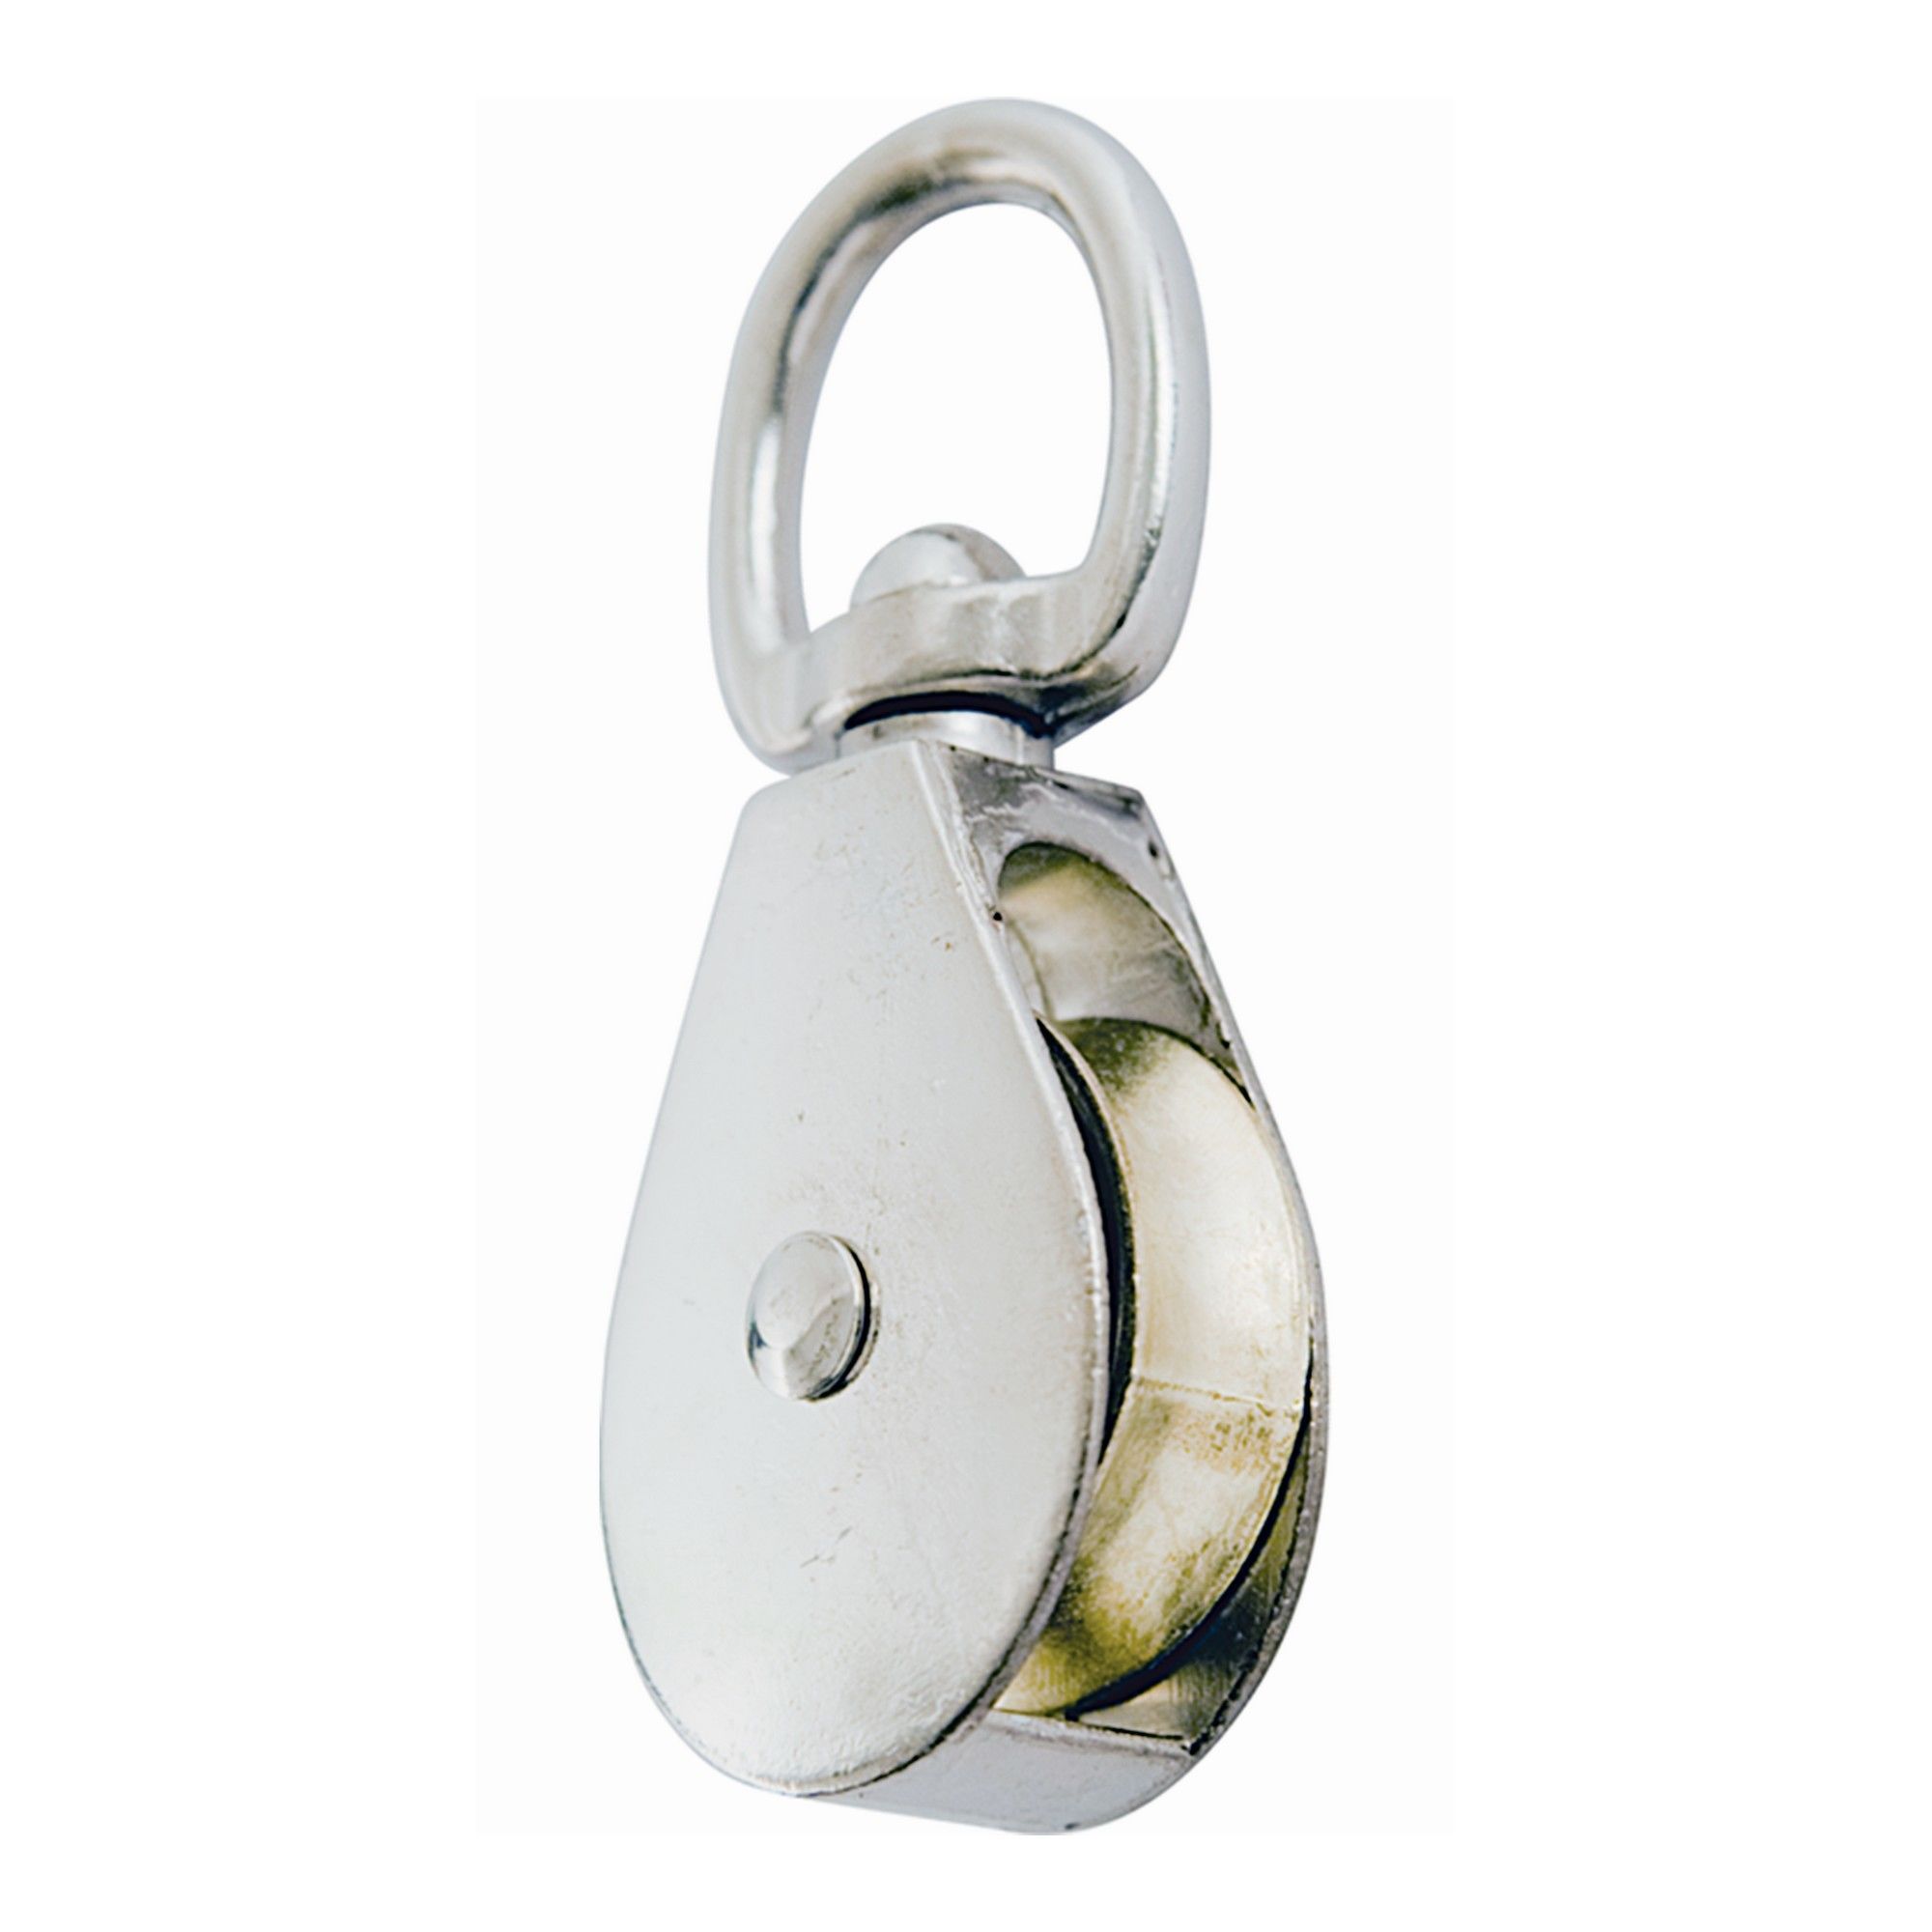 Single Sheave with Swivel Eye Rope Pulley - 1 from KINGCHAIN